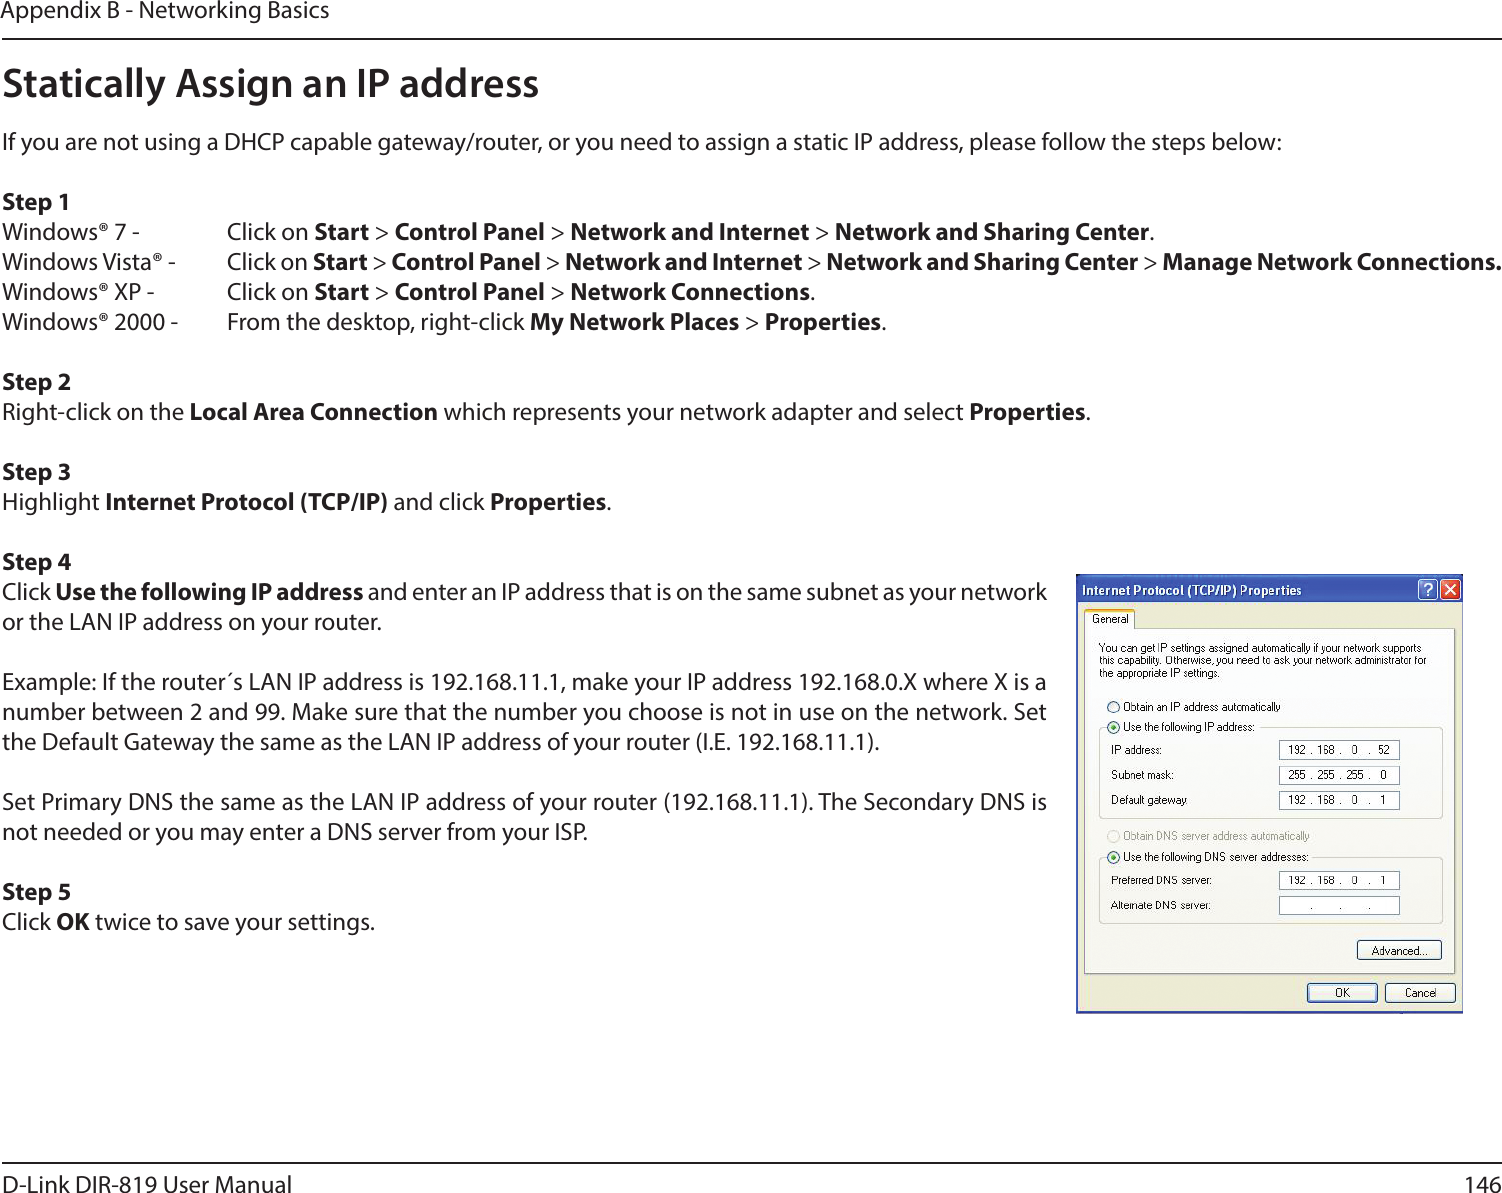 146D-Link DIR-819 User ManualAppendix B - Networking BasicsStatically Assign an IP addressIf you are not using a DHCP capable gateway/router, or you need to assign a static IP address, please follow the steps below:Step 1Windows® 7 -    Click on Start &gt; Control Panel &gt; Network and Internet &gt; Network and Sharing Center.Windows Vista® -  Click on Start &gt; Control Panel &gt; Network and Internet &gt; Network and Sharing Center &gt; Manage Network Connections.Windows® XP -  Click on Start &gt; Control Panel &gt; Network Connections.Windows® 2000 -  From the desktop, right-click My Network Places &gt; Properties.Step 2Right-click on the Local Area Connection which represents your network adapter and select Properties.Step 3Highlight Internet Protocol (TCP/IP) and click Properties.Step 4Click Use the following IP address and enter an IP address that is on the same subnet as your network or the LAN IP address on your router. Example: If the router´s LAN IP address is 192.168.11.1, make your IP address 192.168.0.X where X is a number between 2 and 99. Make sure that the number you choose is not in use on the network. Set the Default Gateway the same as the LAN IP address of your router (I.E. 192.168.11.1). Set Primary DNS the same as the LAN IP address of your router (192.168.11.1). The Secondary DNS is not needed or you may enter a DNS server from your ISP.Step 5Click OK twice to save your settings.